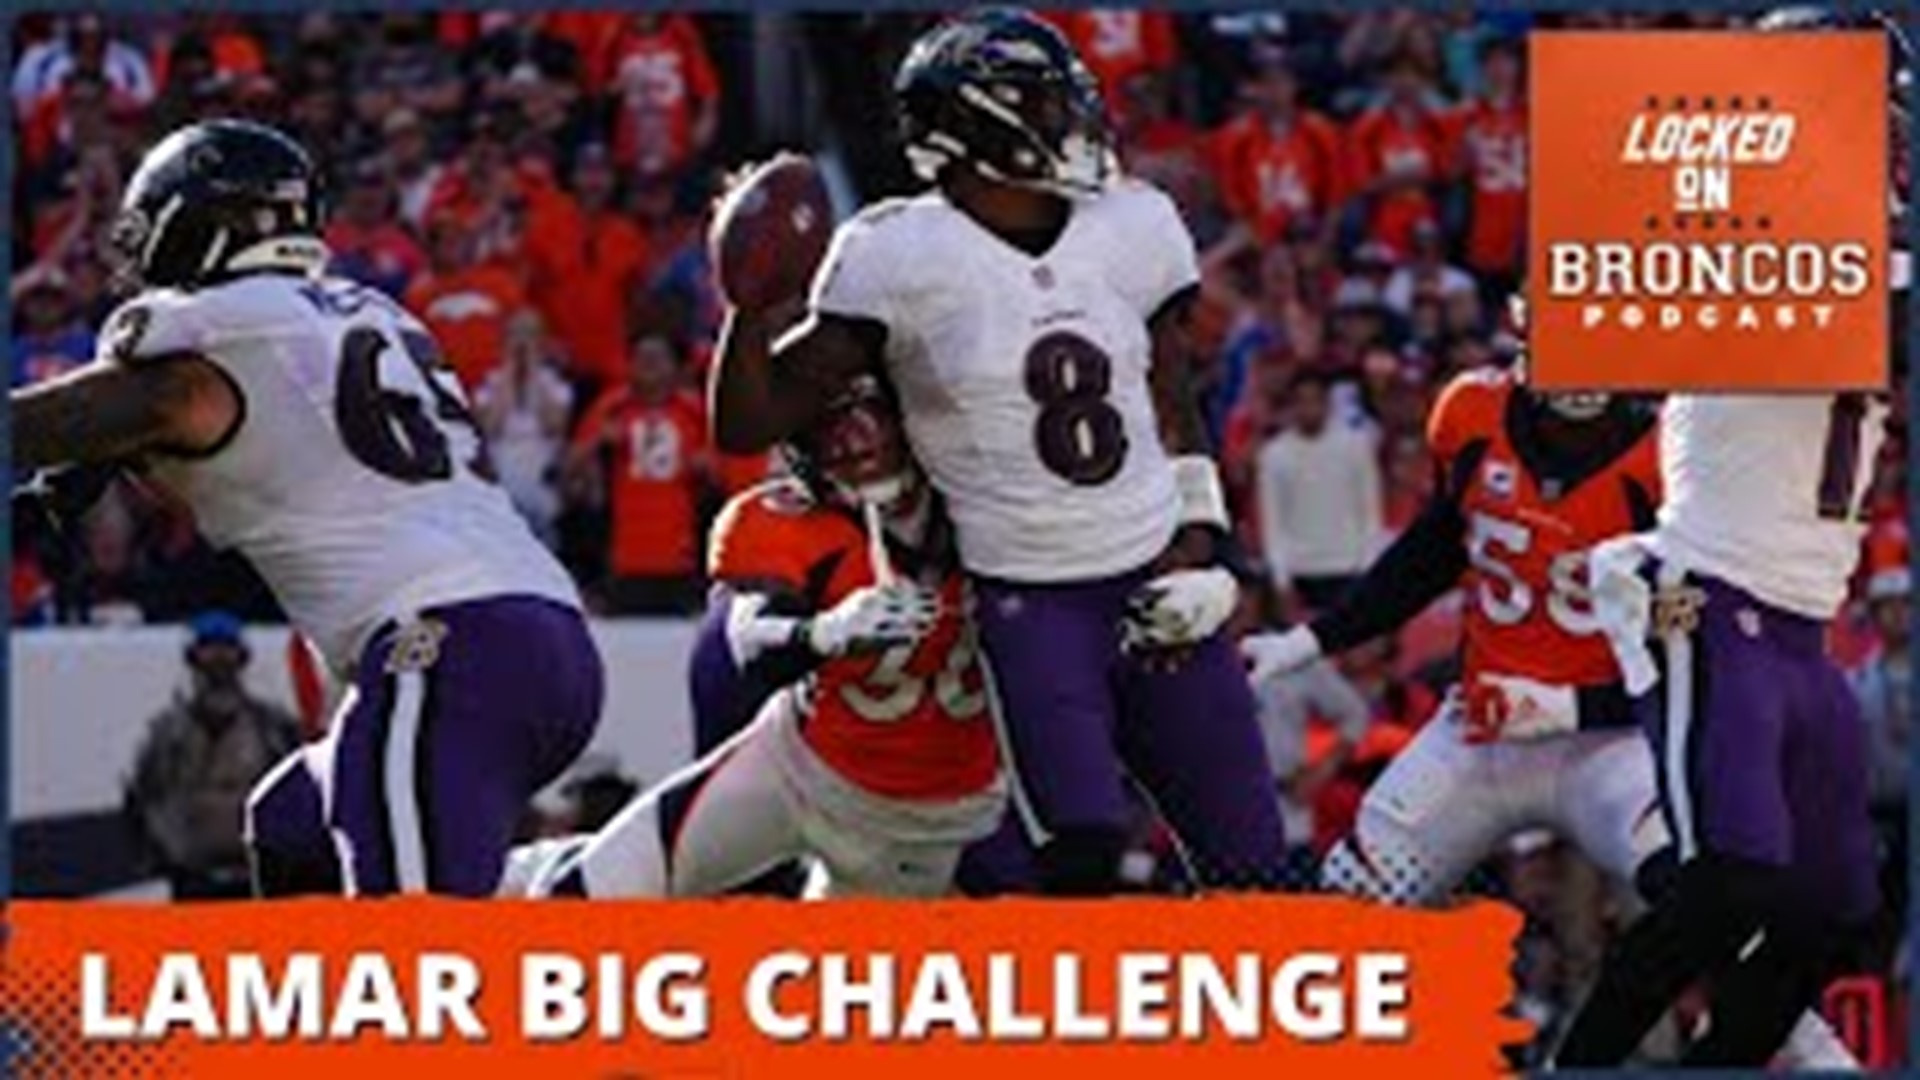 The Denver Broncos defense has their hands full as they prepare for the dynamic challenge of Lamar Jackson this upcoming Sunday against the Baltimore Ravens.